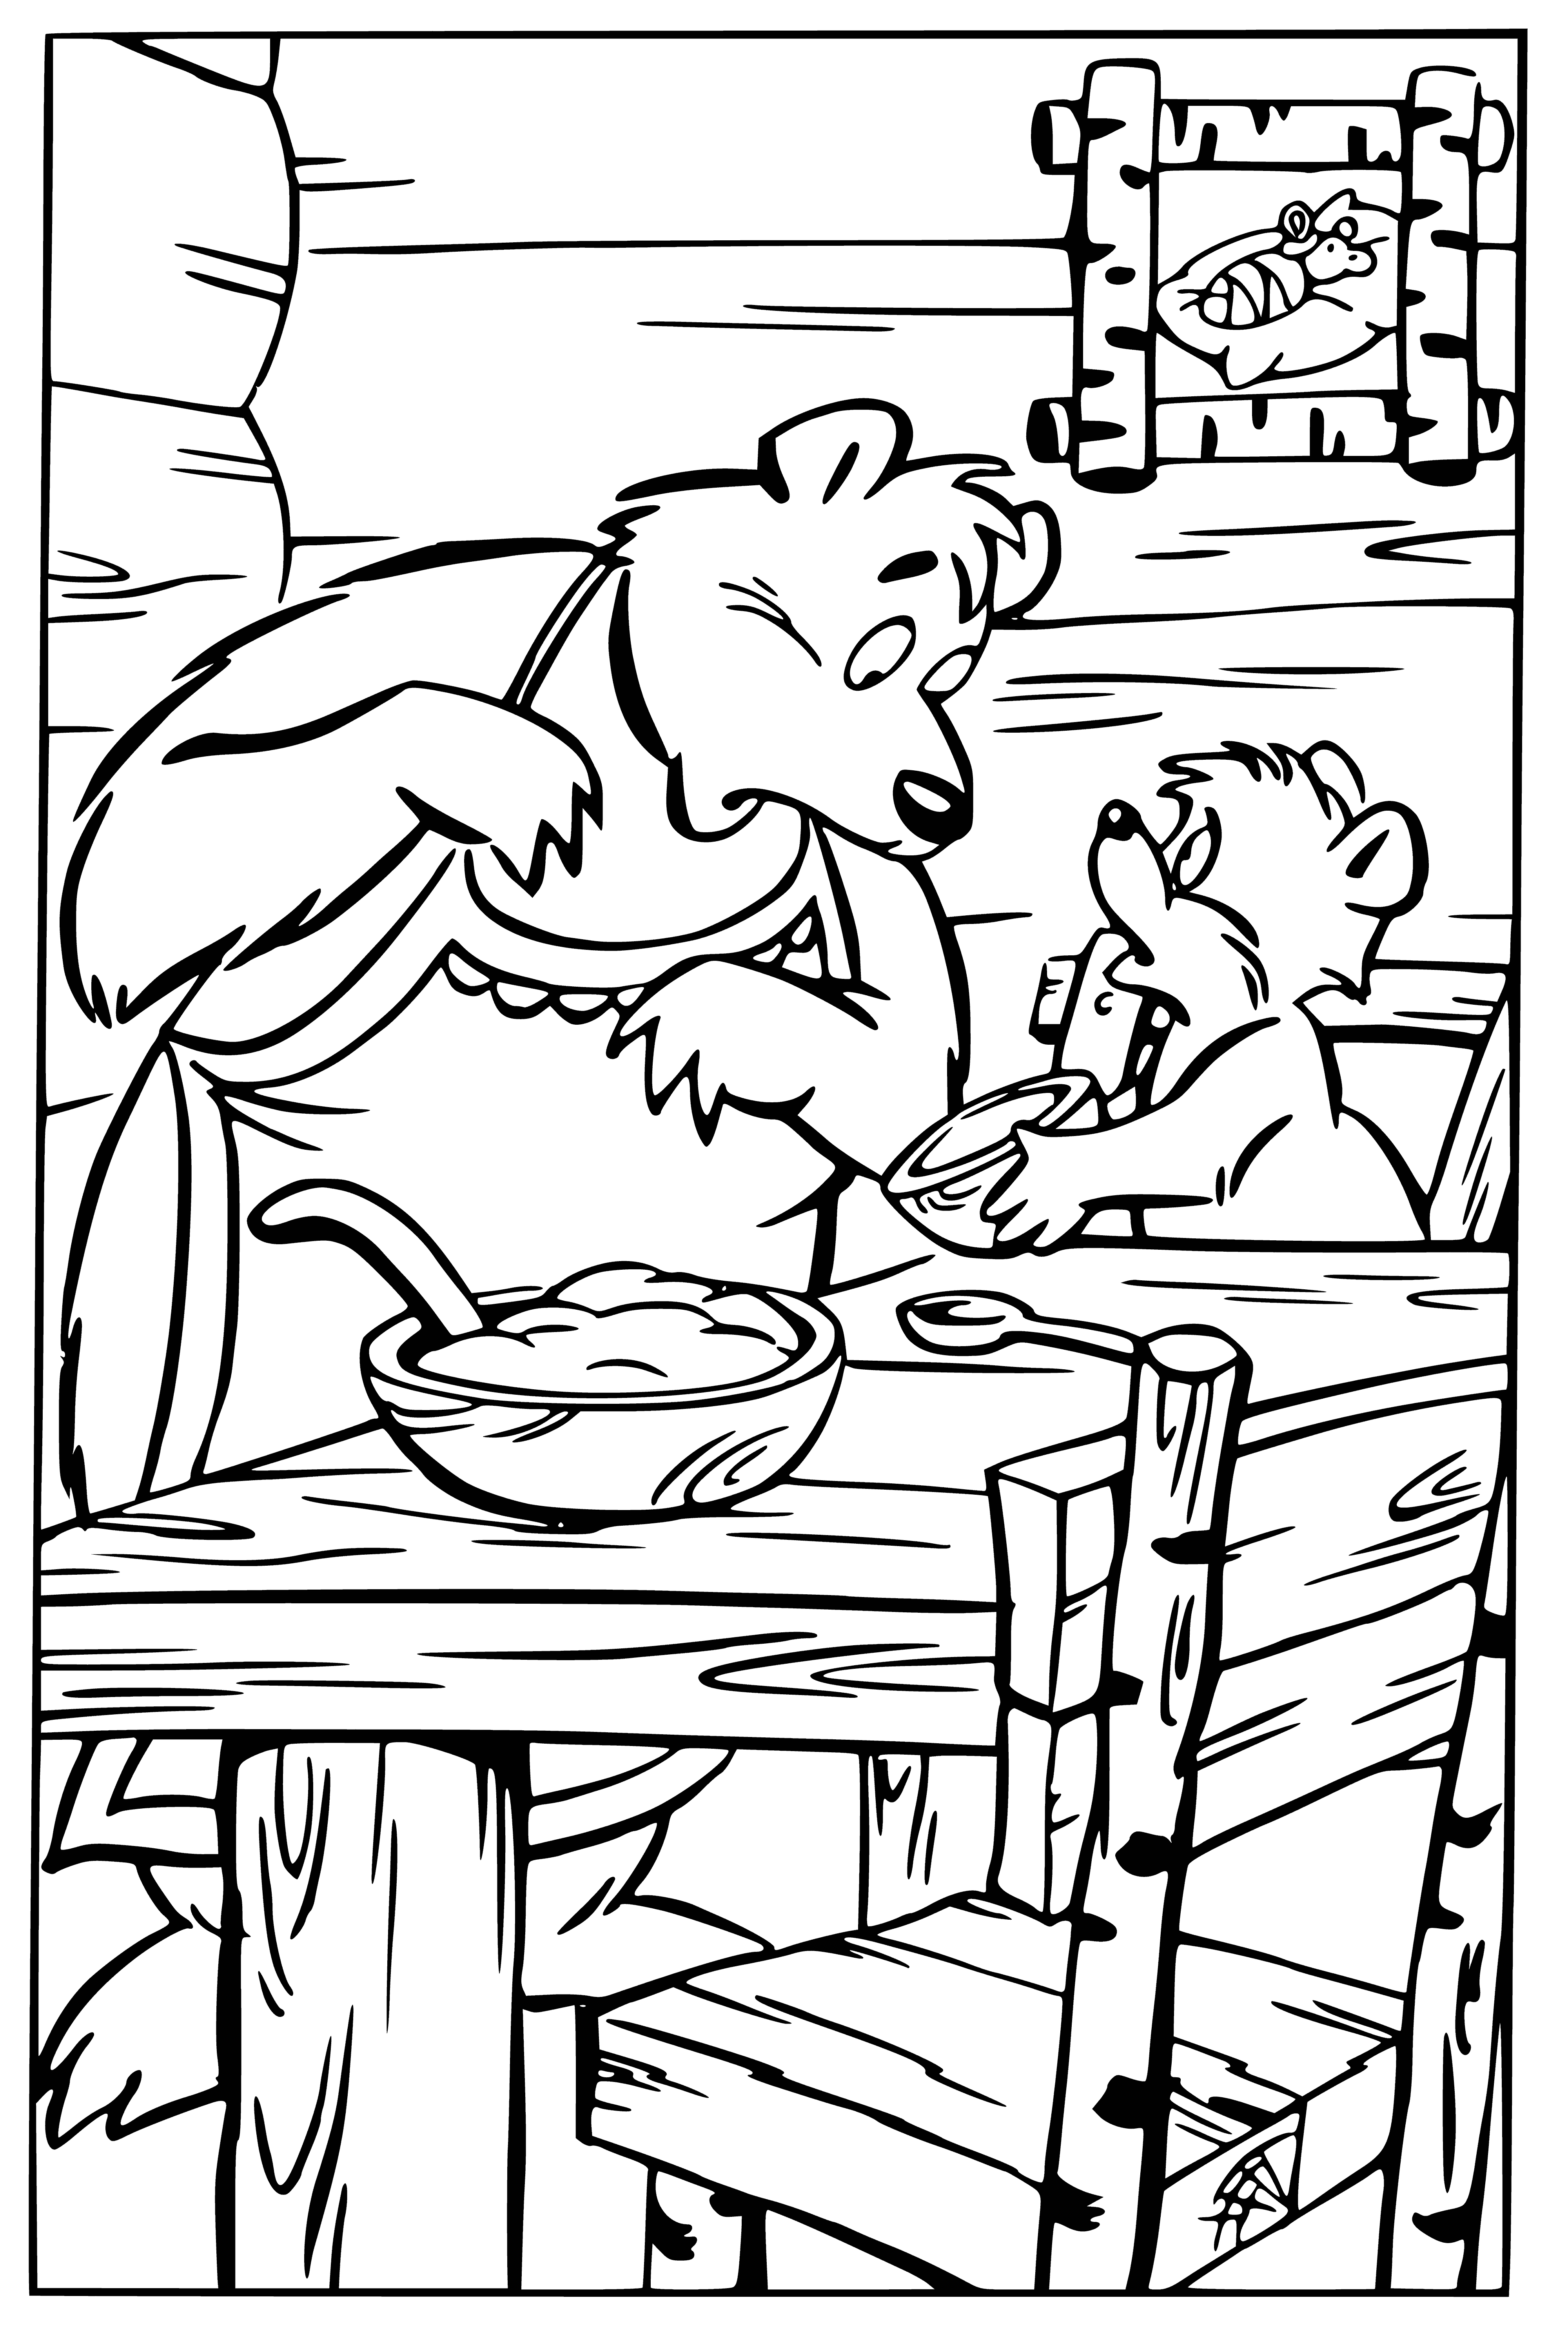 Who sipped from my bowl? coloring page